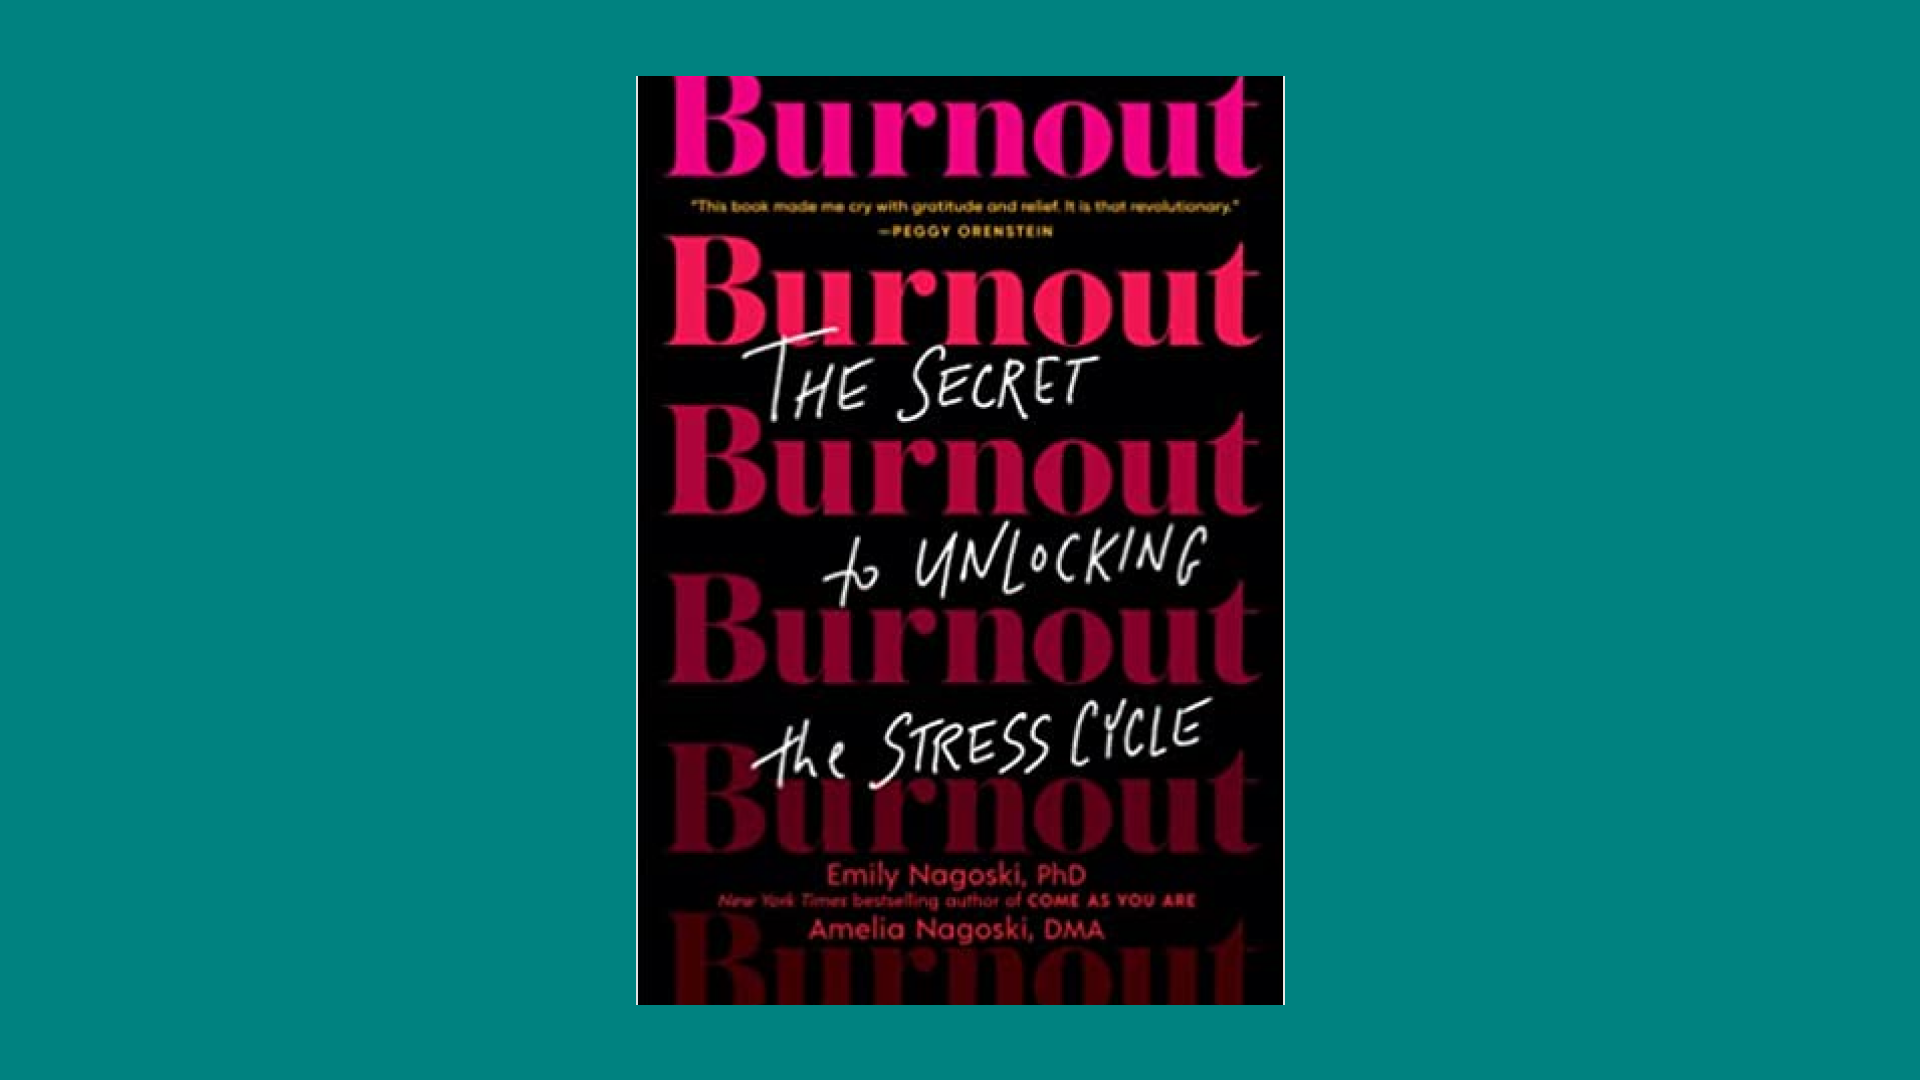 "Burnout: The Secret to Unlocking the Stress Cycle" by Emily Nagoski, Ph.D., and Amelia Nagoski, D.M.A